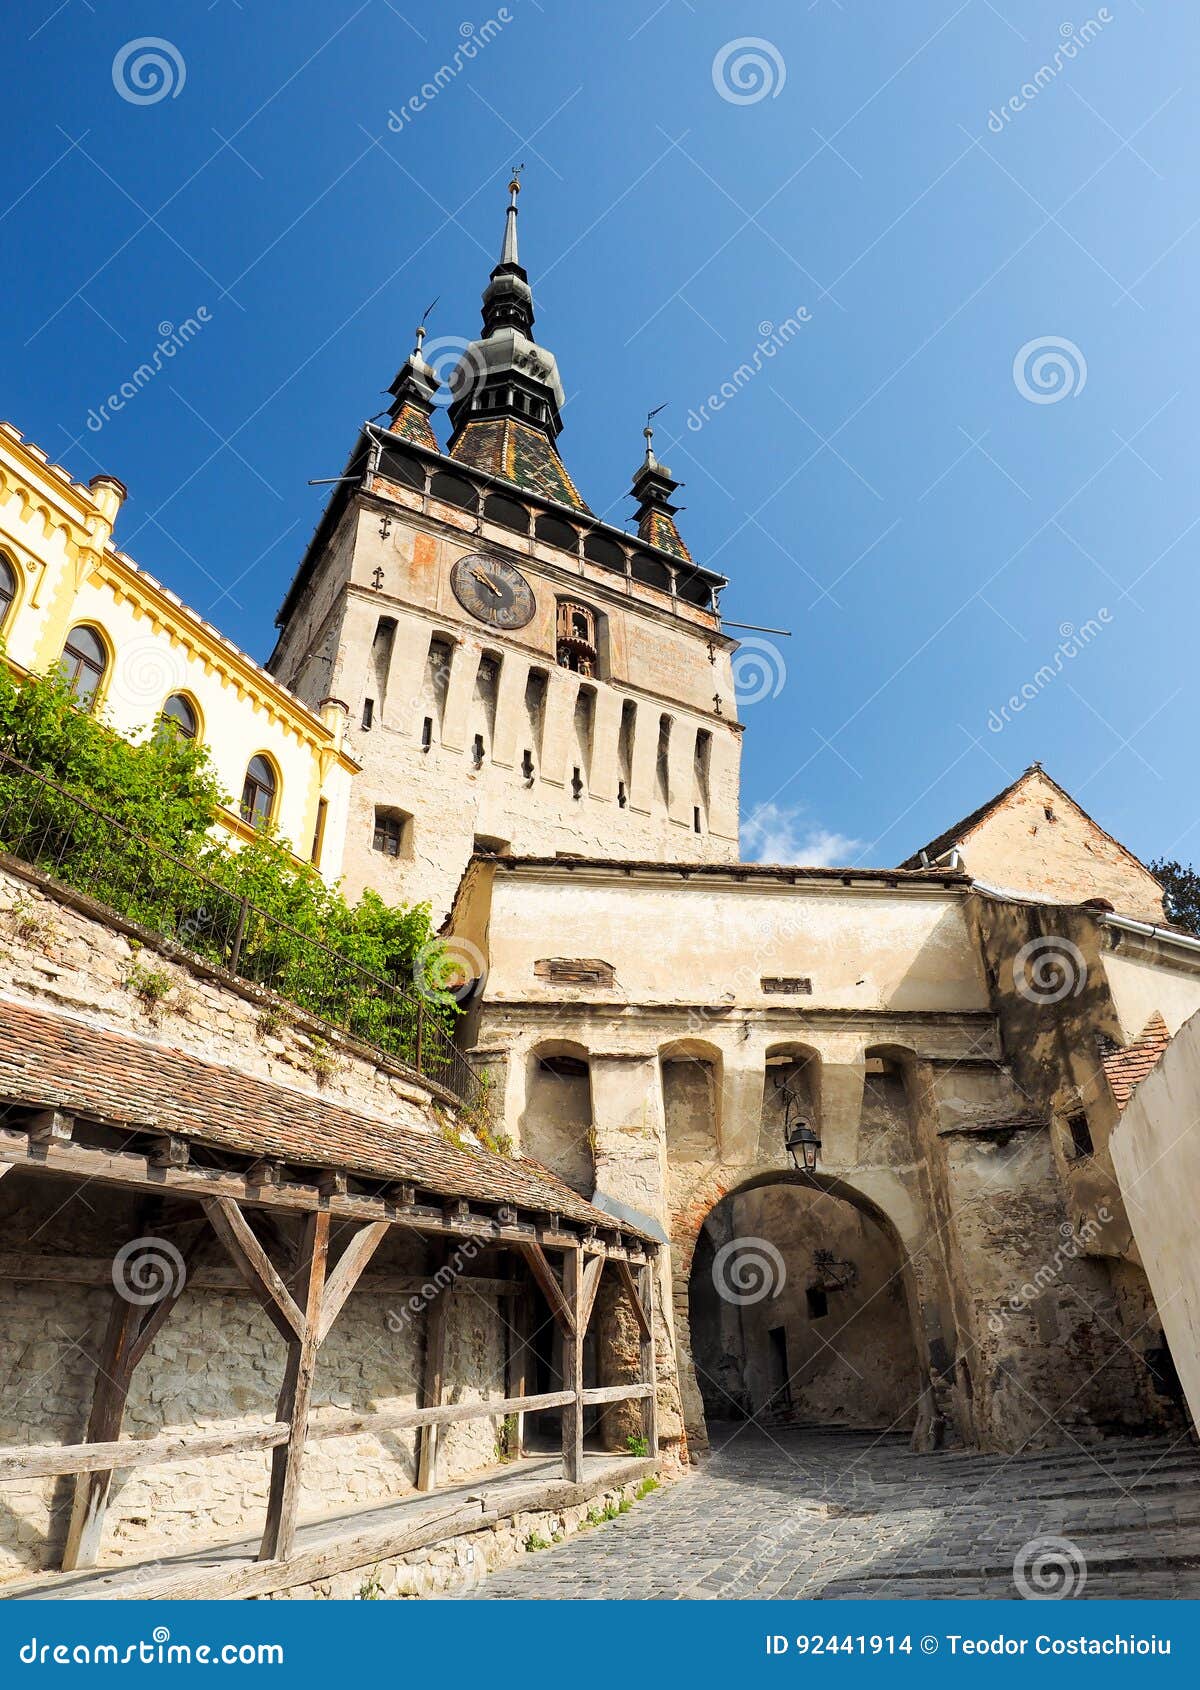 the clock tower in sighisoara